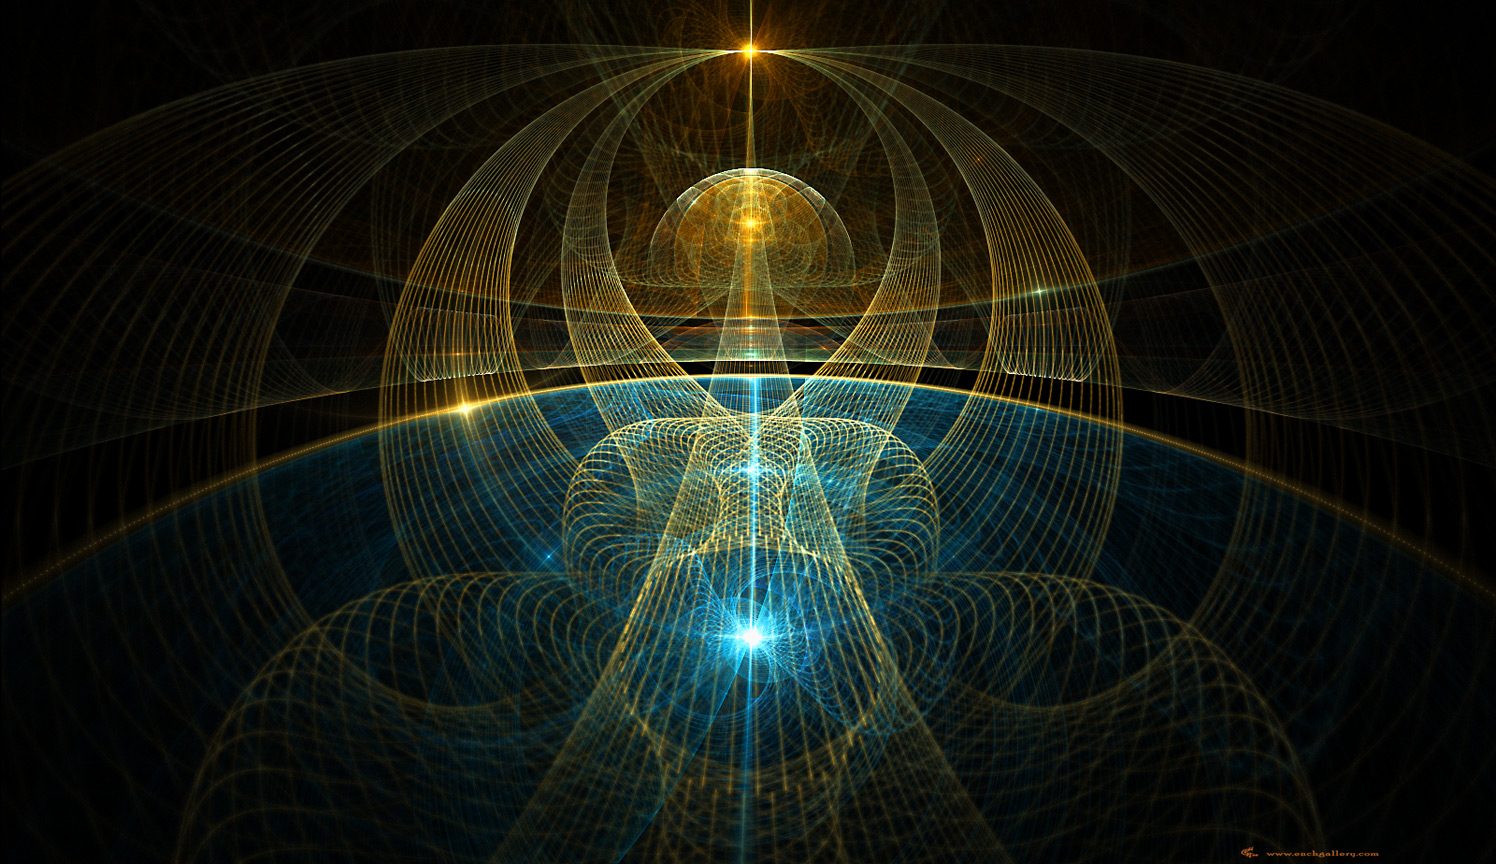 http://www.enchgallery.com/fractals/fractal%20images/string-theory-2.jpg